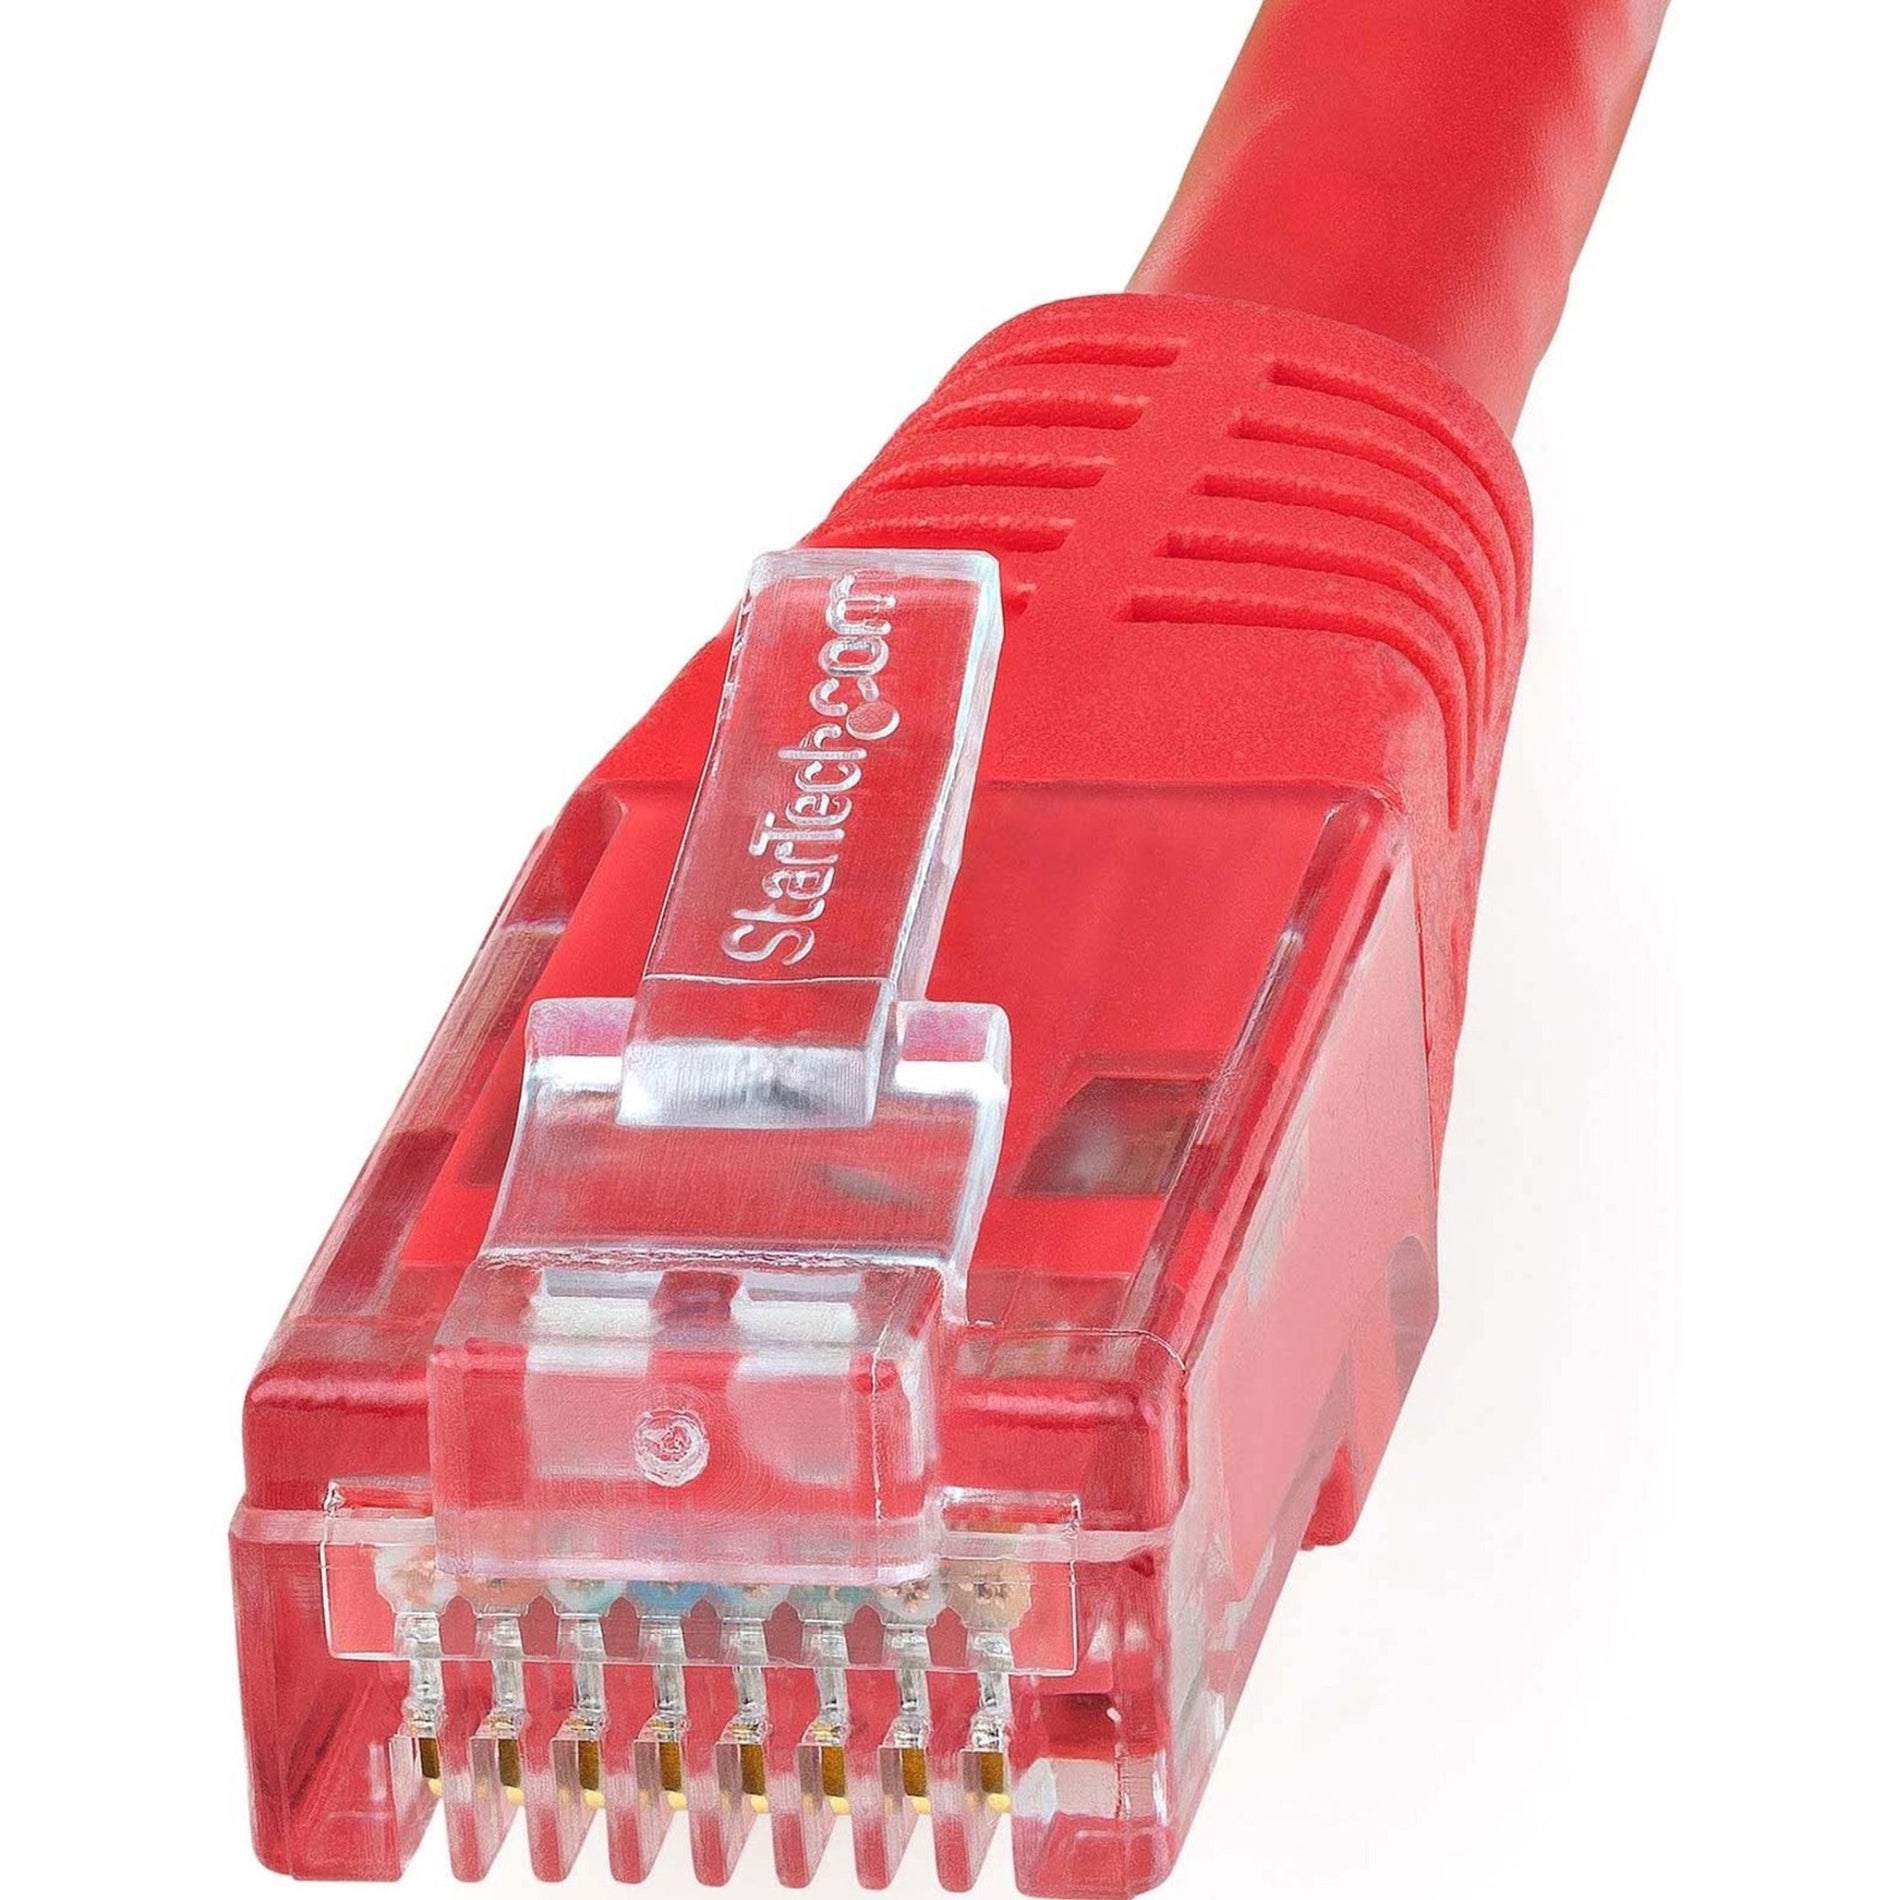 StarTech.com C6PATCH7RD 7ft Red Cat6 UTP Patch Cable ETL Verified, Bend Resistant, Stranded, PoE++, Fray Resistant, Rust Resistant, Damage Resistant, Corrosion Resistant, Molded, PoE, Strain Relief